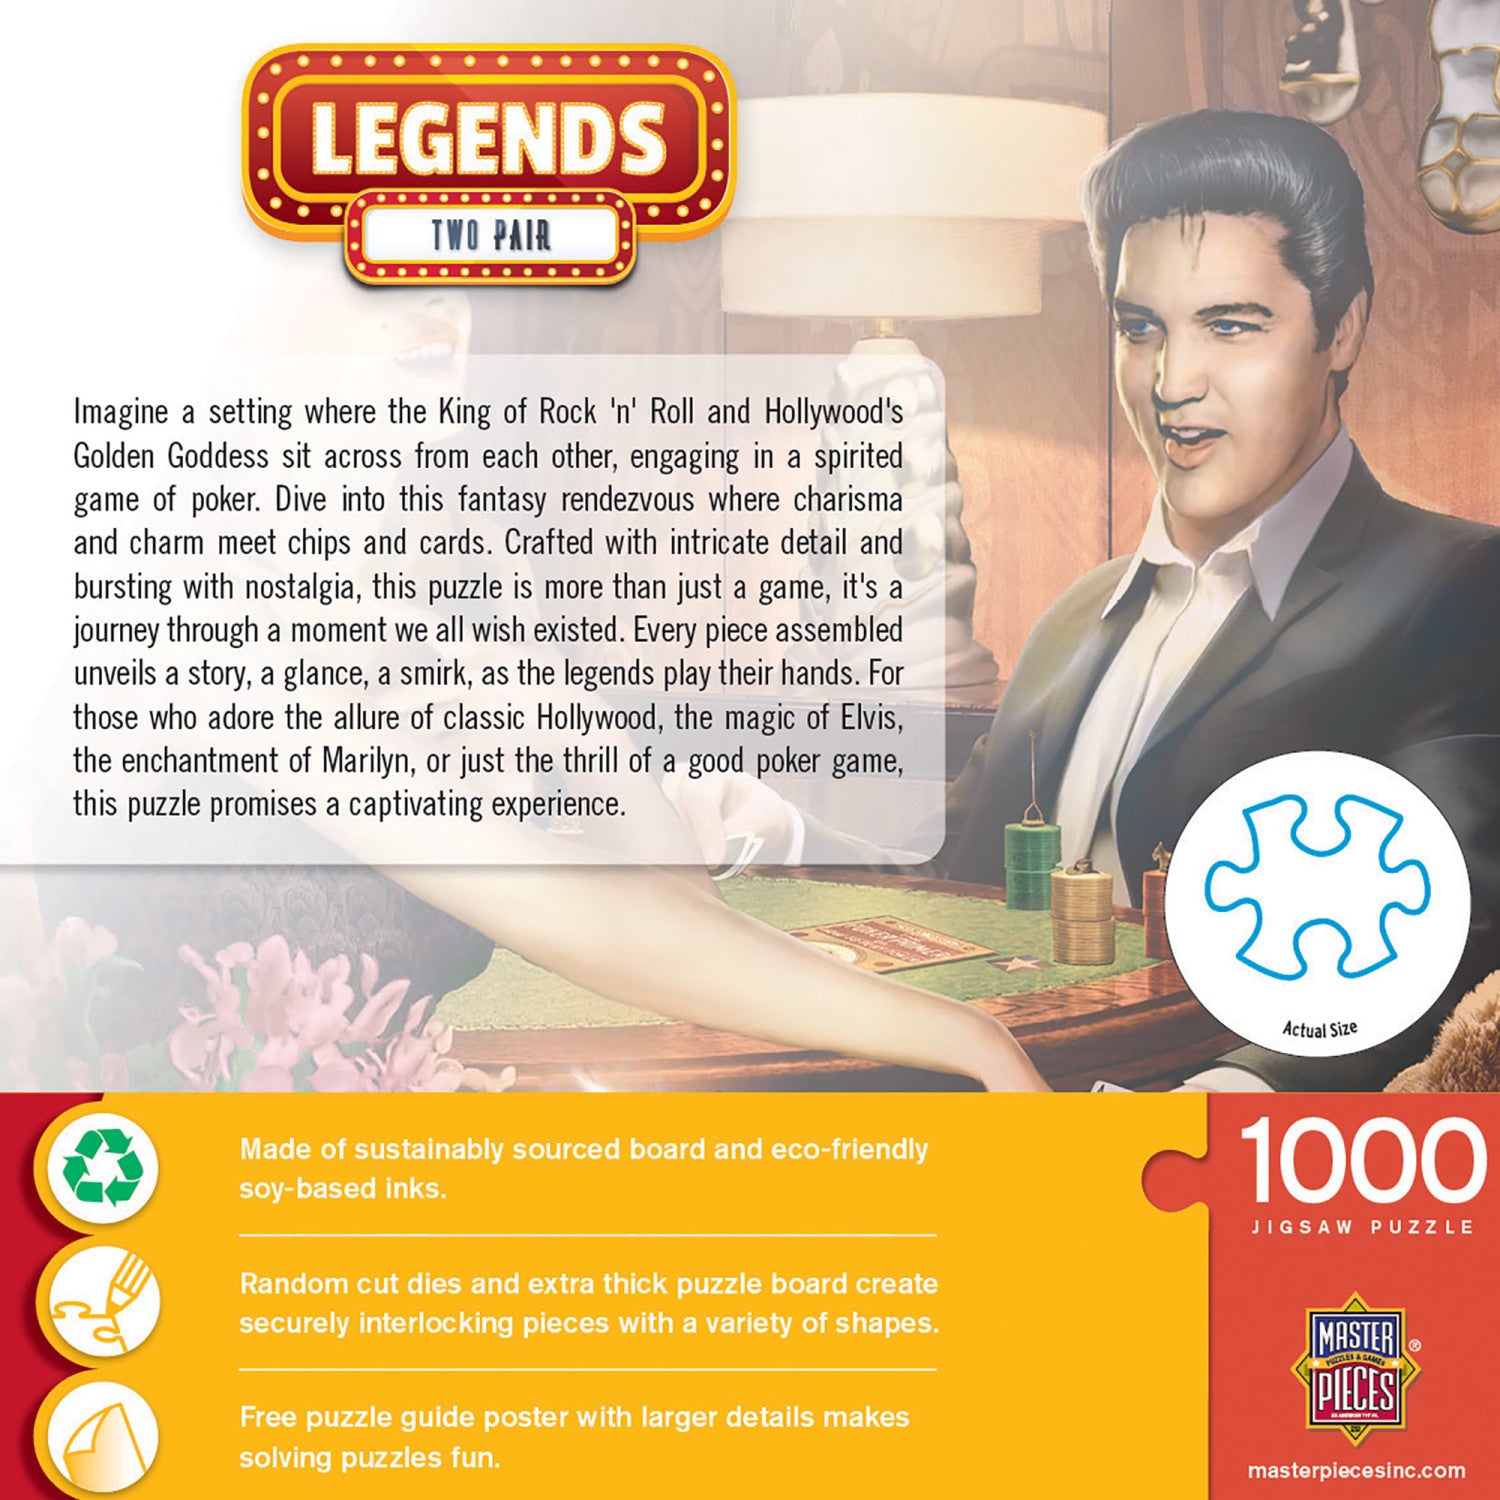 Legends - Two Pair 1000 Piece Jigsaw Puzzle